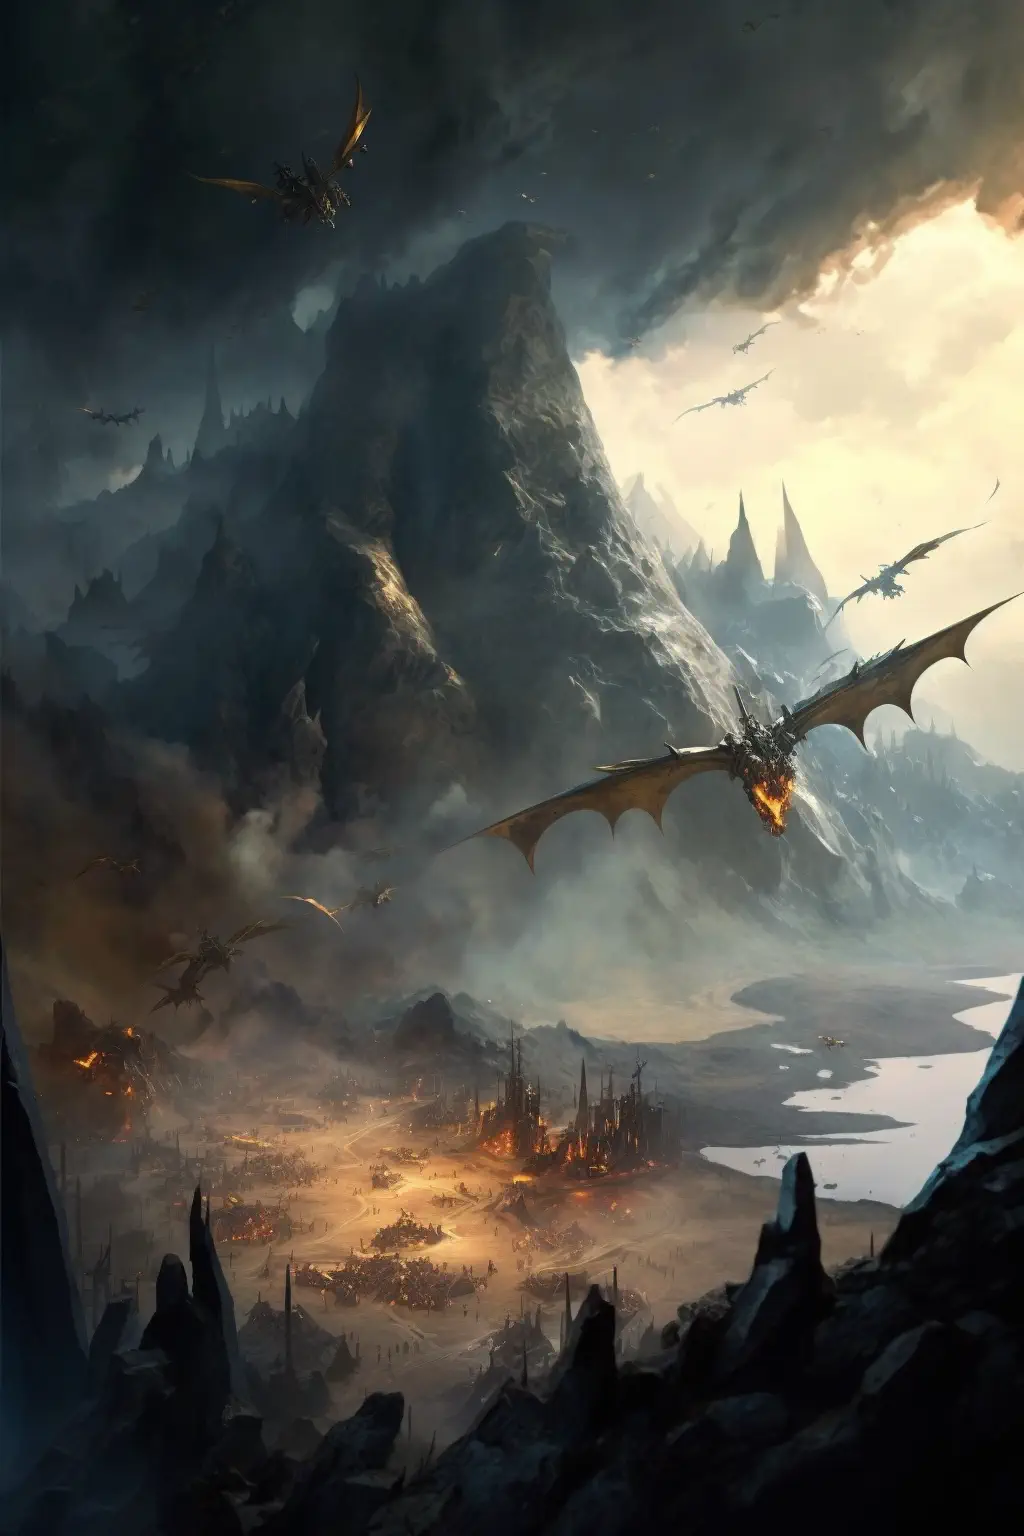 Draken_large_scale_fantasy_war_with_dragons_view_from_the_sky_v_730a9867-7848-4df4-afef-de917f1dcca1